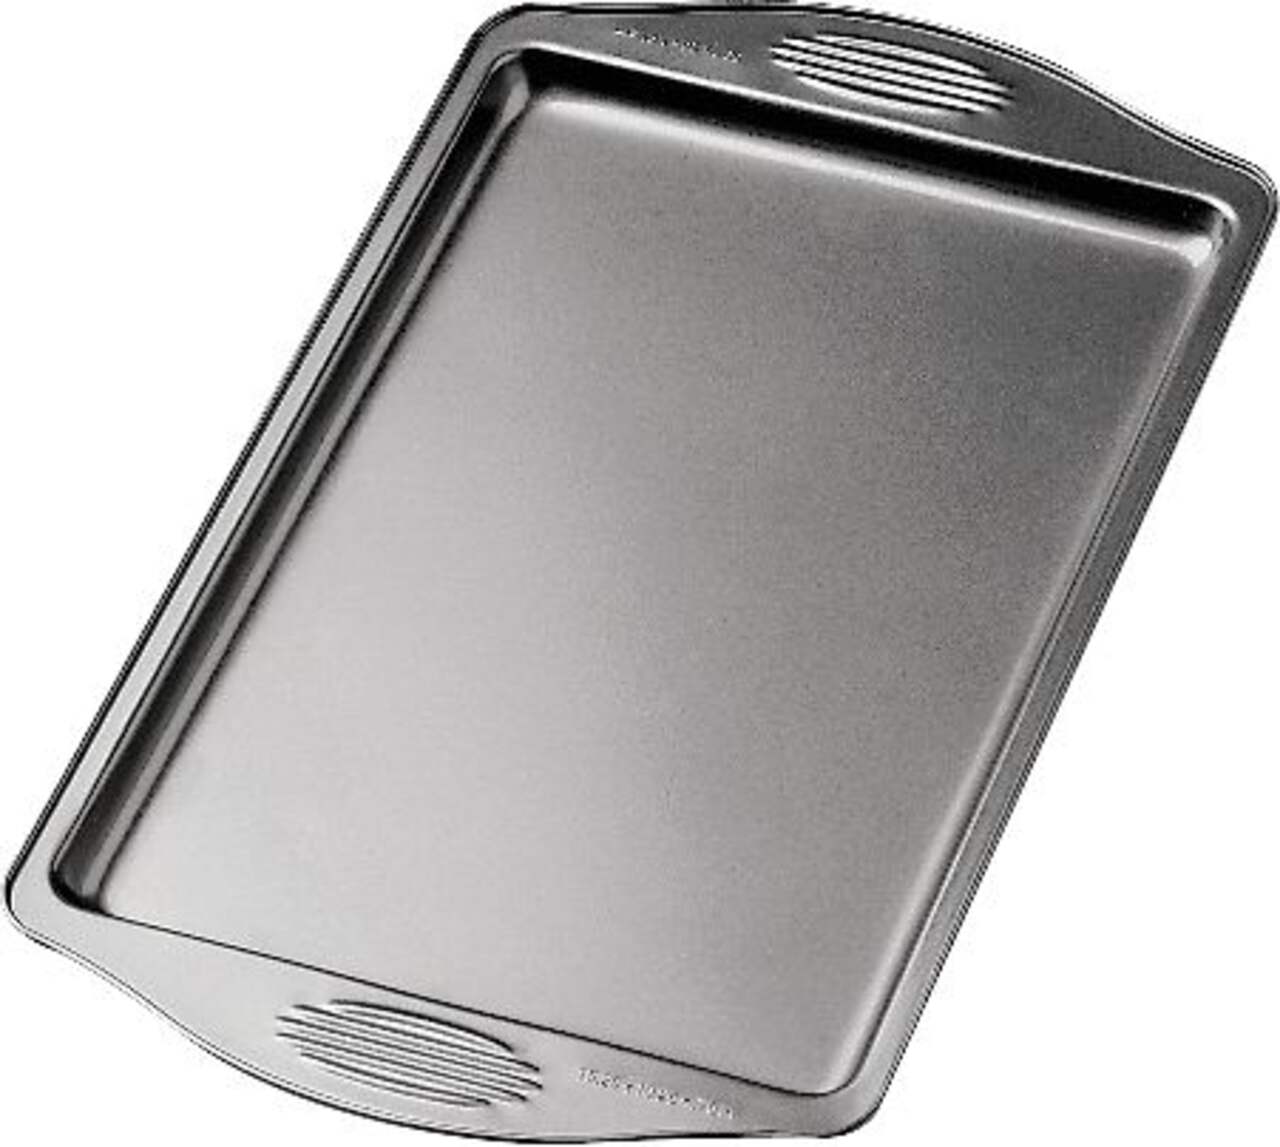 https://media-www.canadiantire.ca/product/living/kitchen/bakeware-baking-prep/0420543/wilton-gourmet-choice-cookie-medium-770d8770-31dc-4772-b0db-f01710455896-jpgrendition.jpg?imdensity=1&imwidth=640&impolicy=mZoom